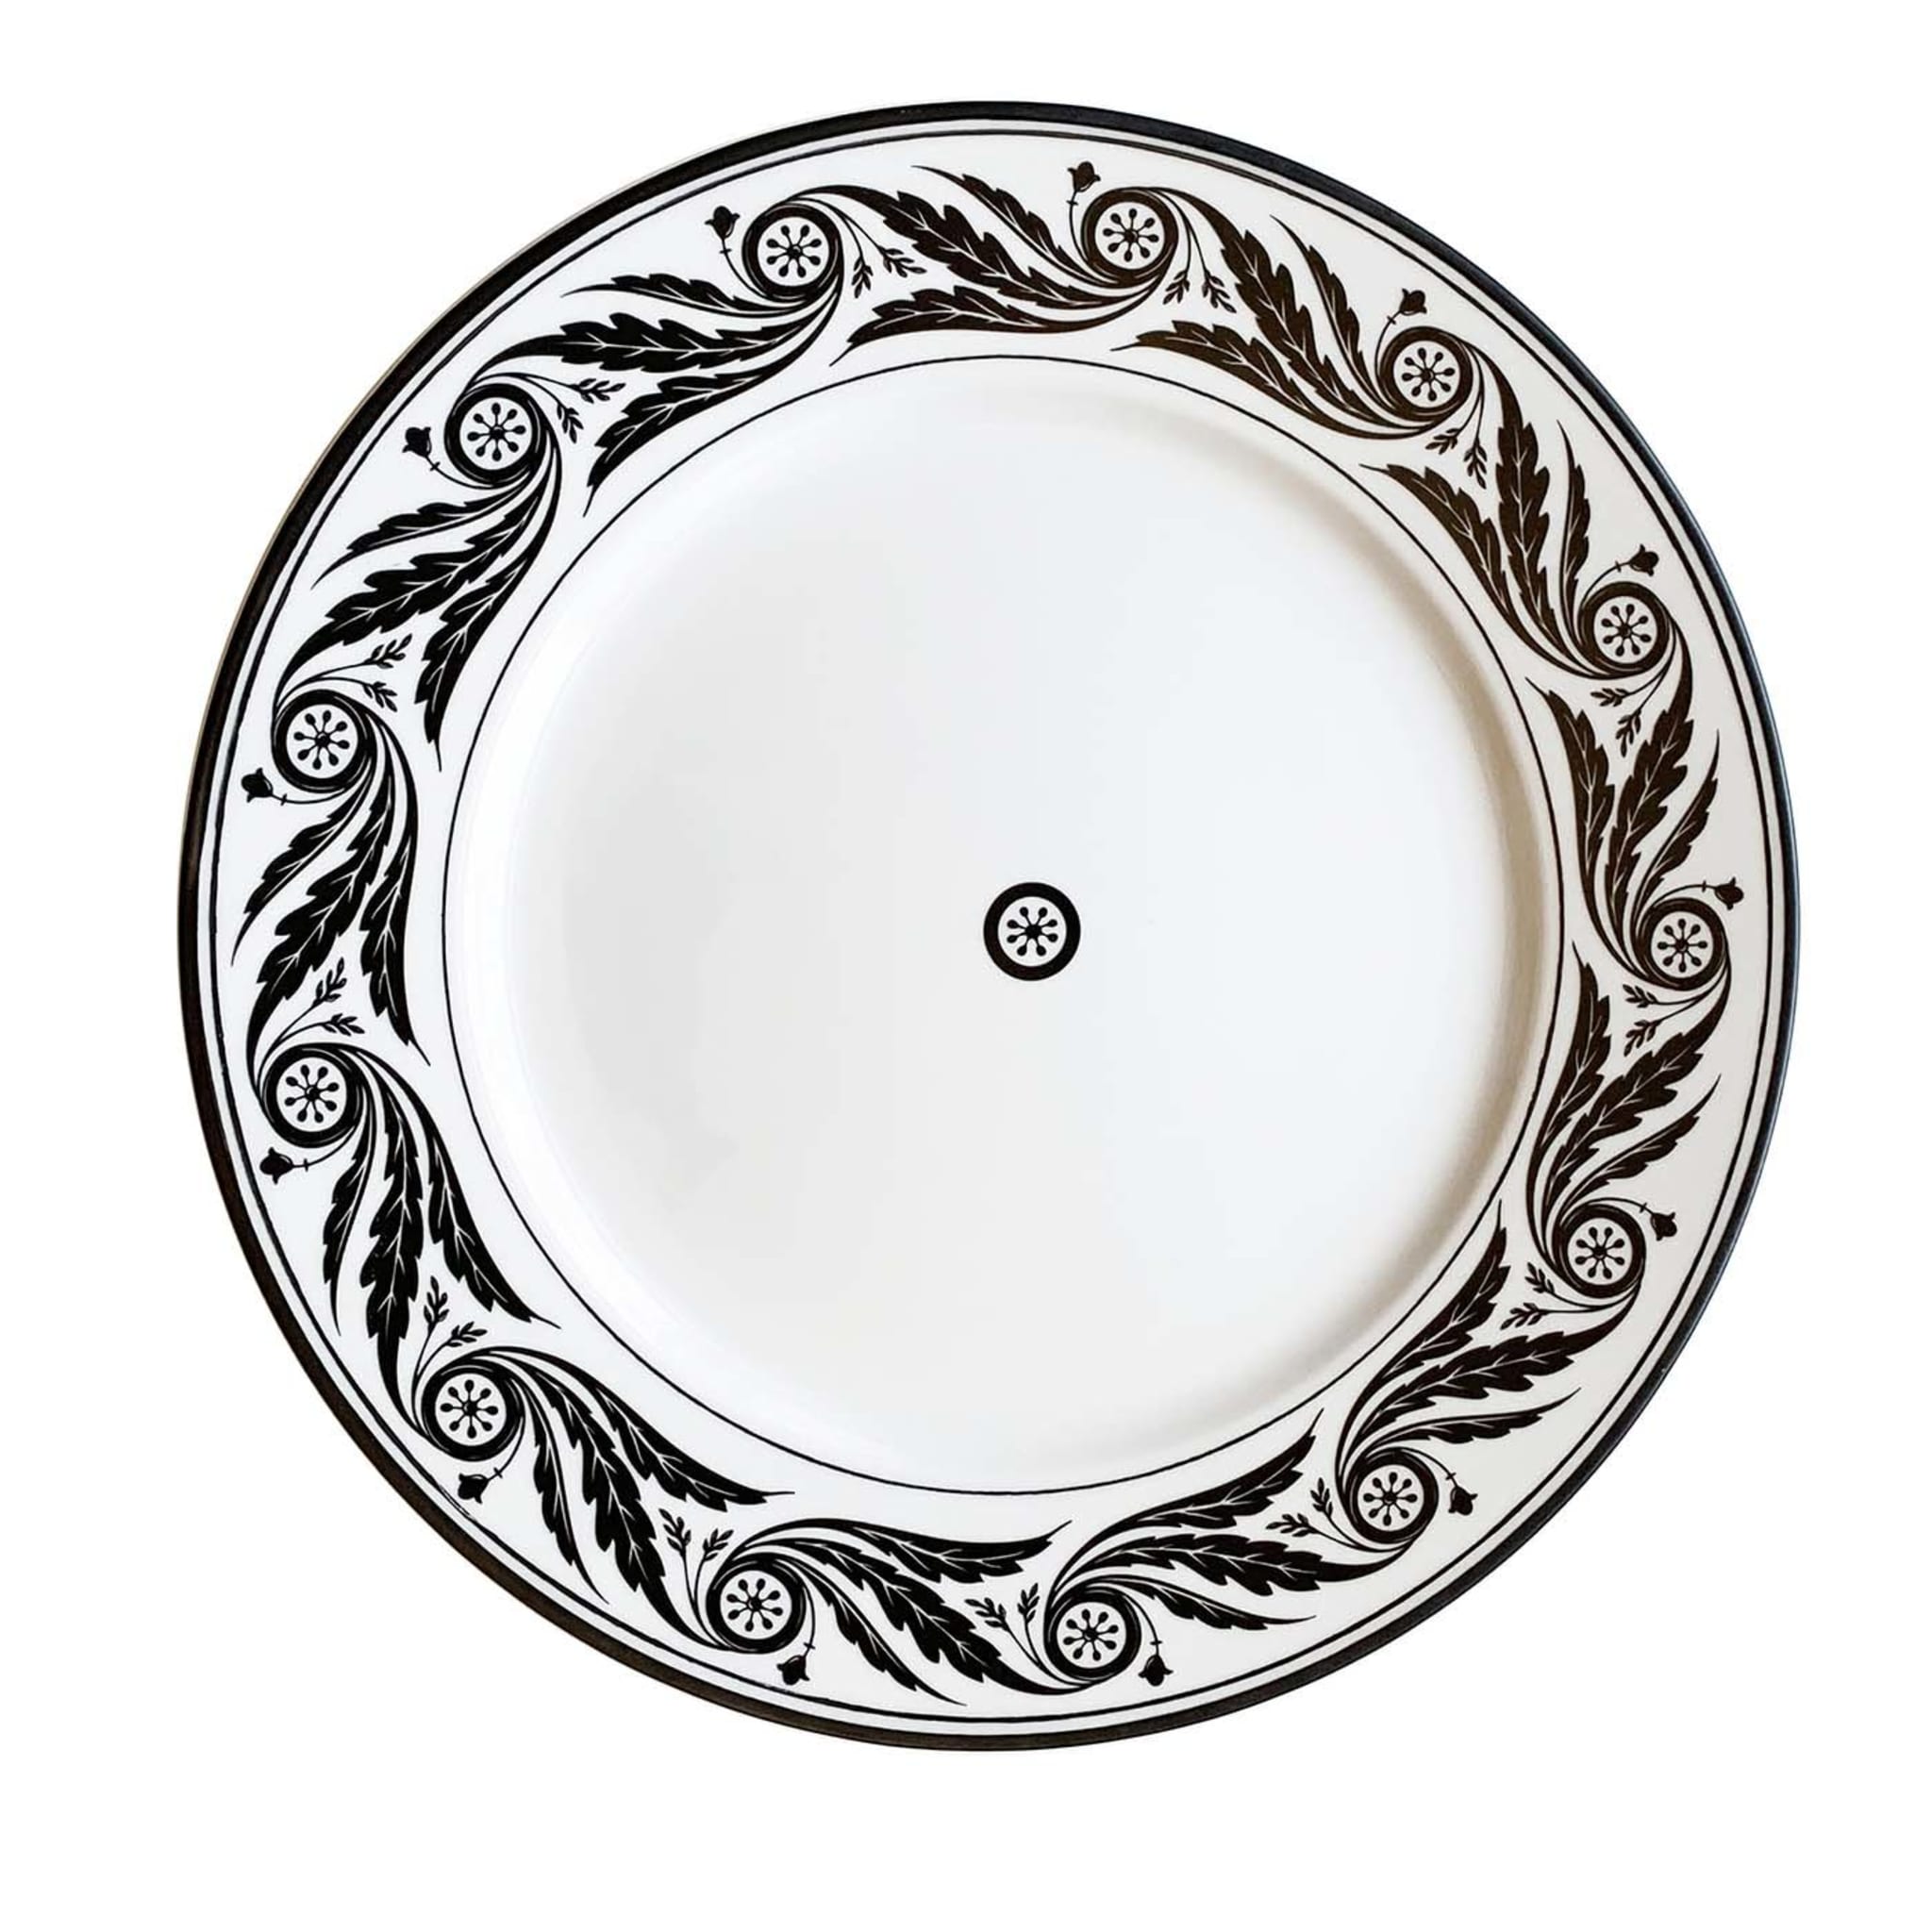 Set of 2 Crisalide Large Dinner Plates - Main view